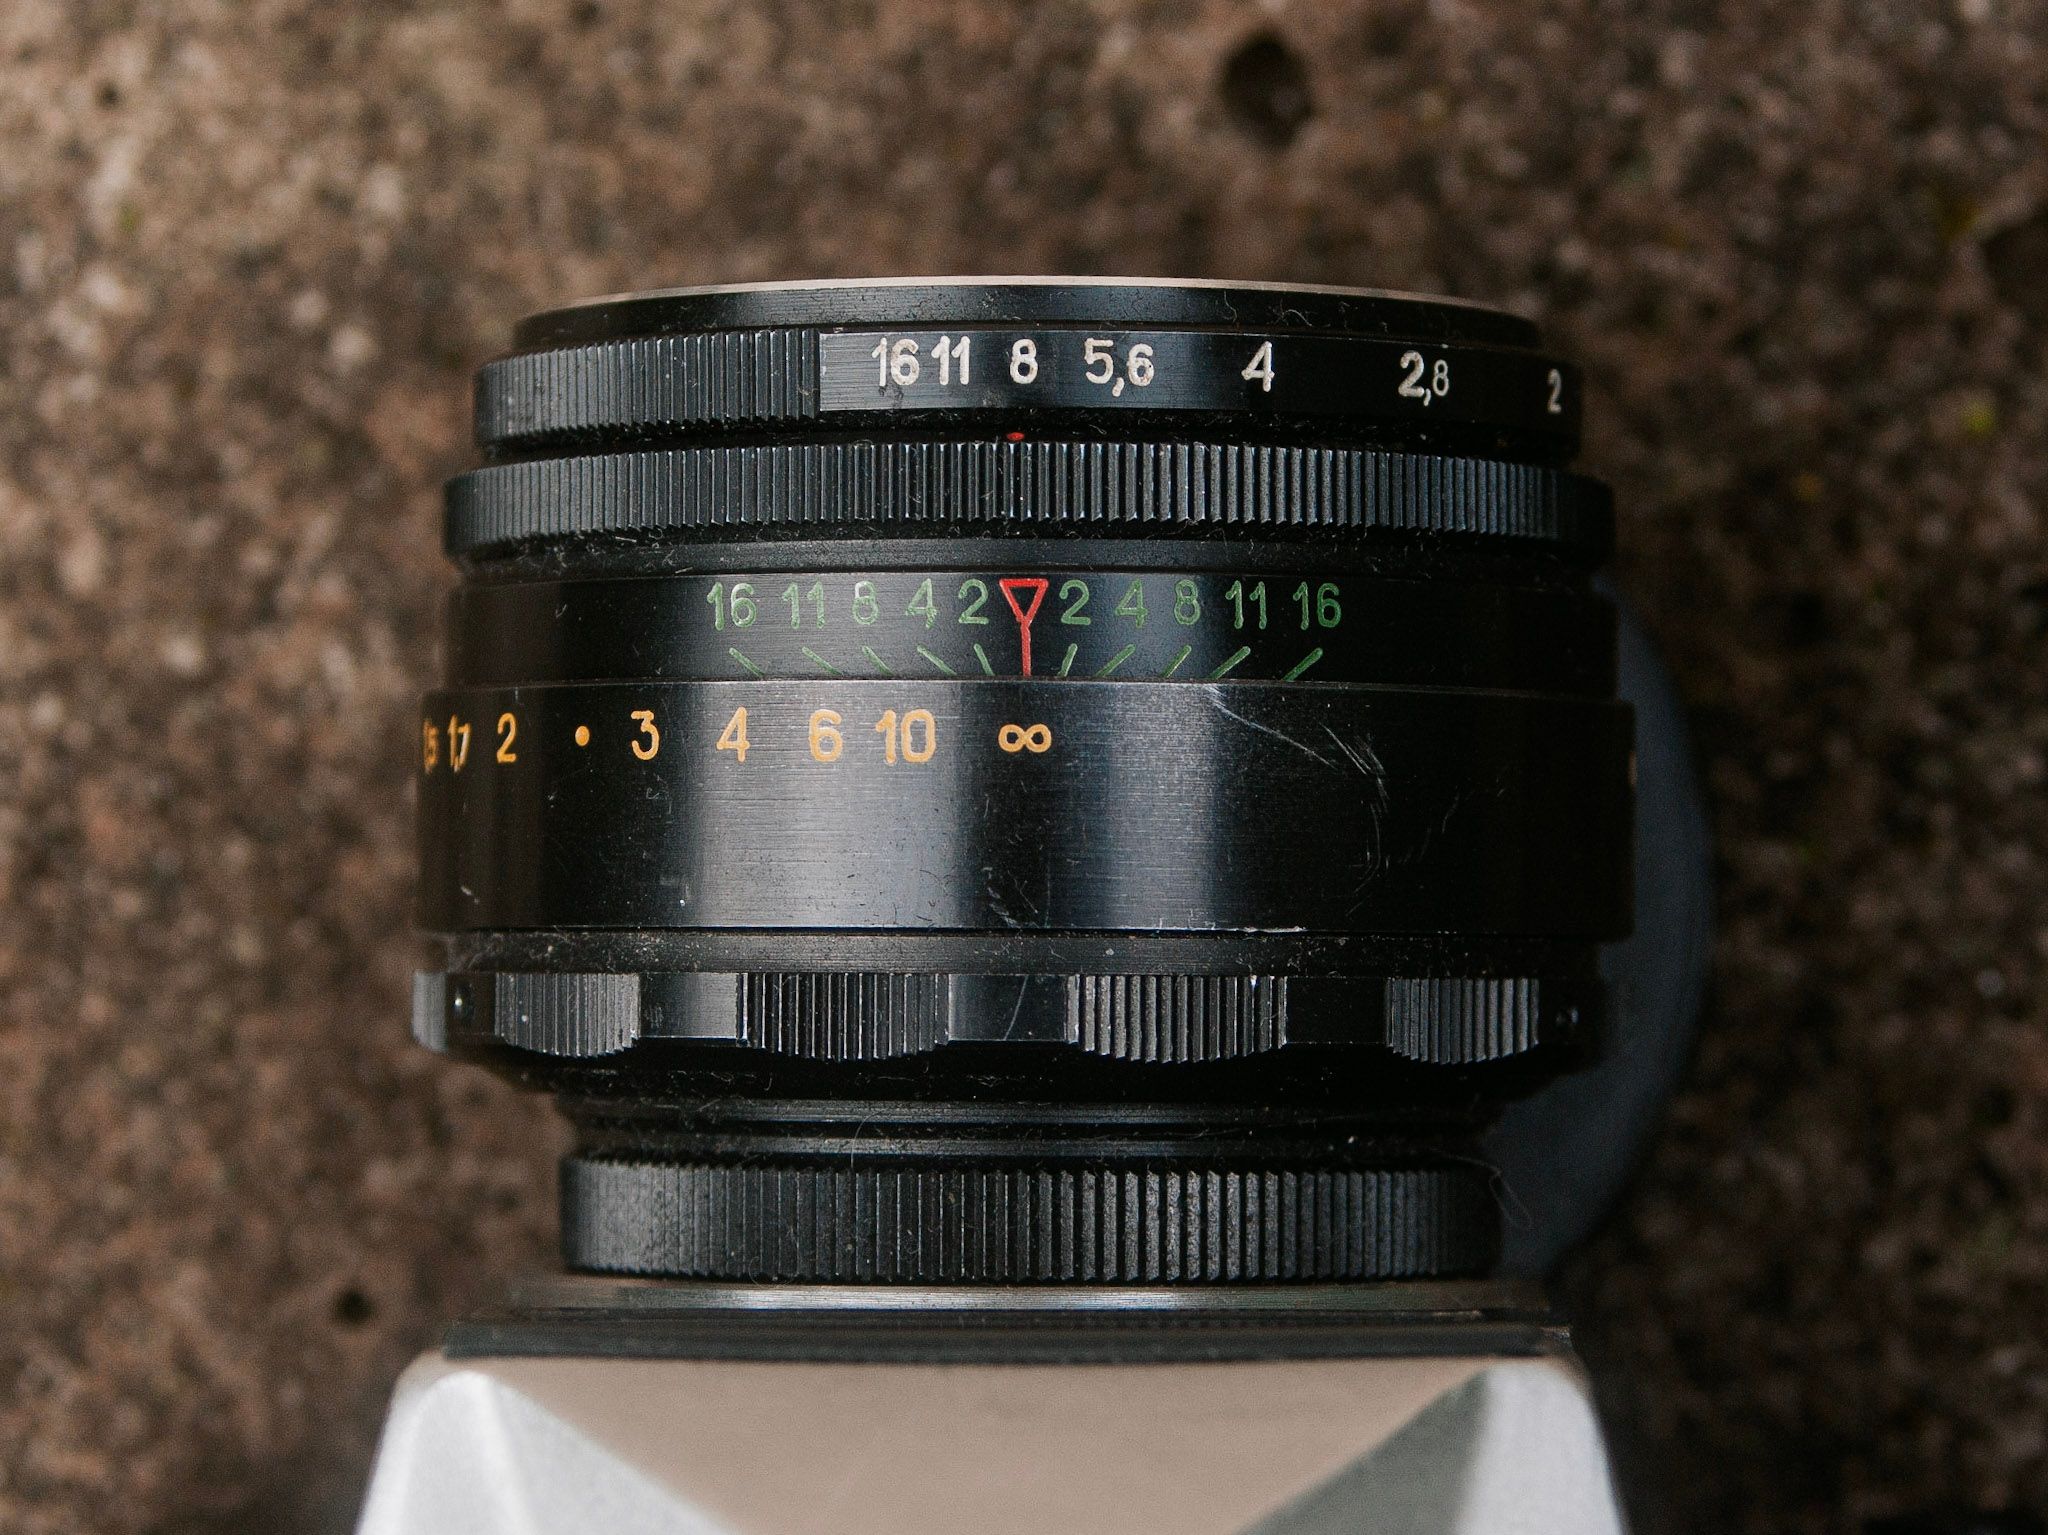 Creating swirly bokeh with the Helios 44-2 lens